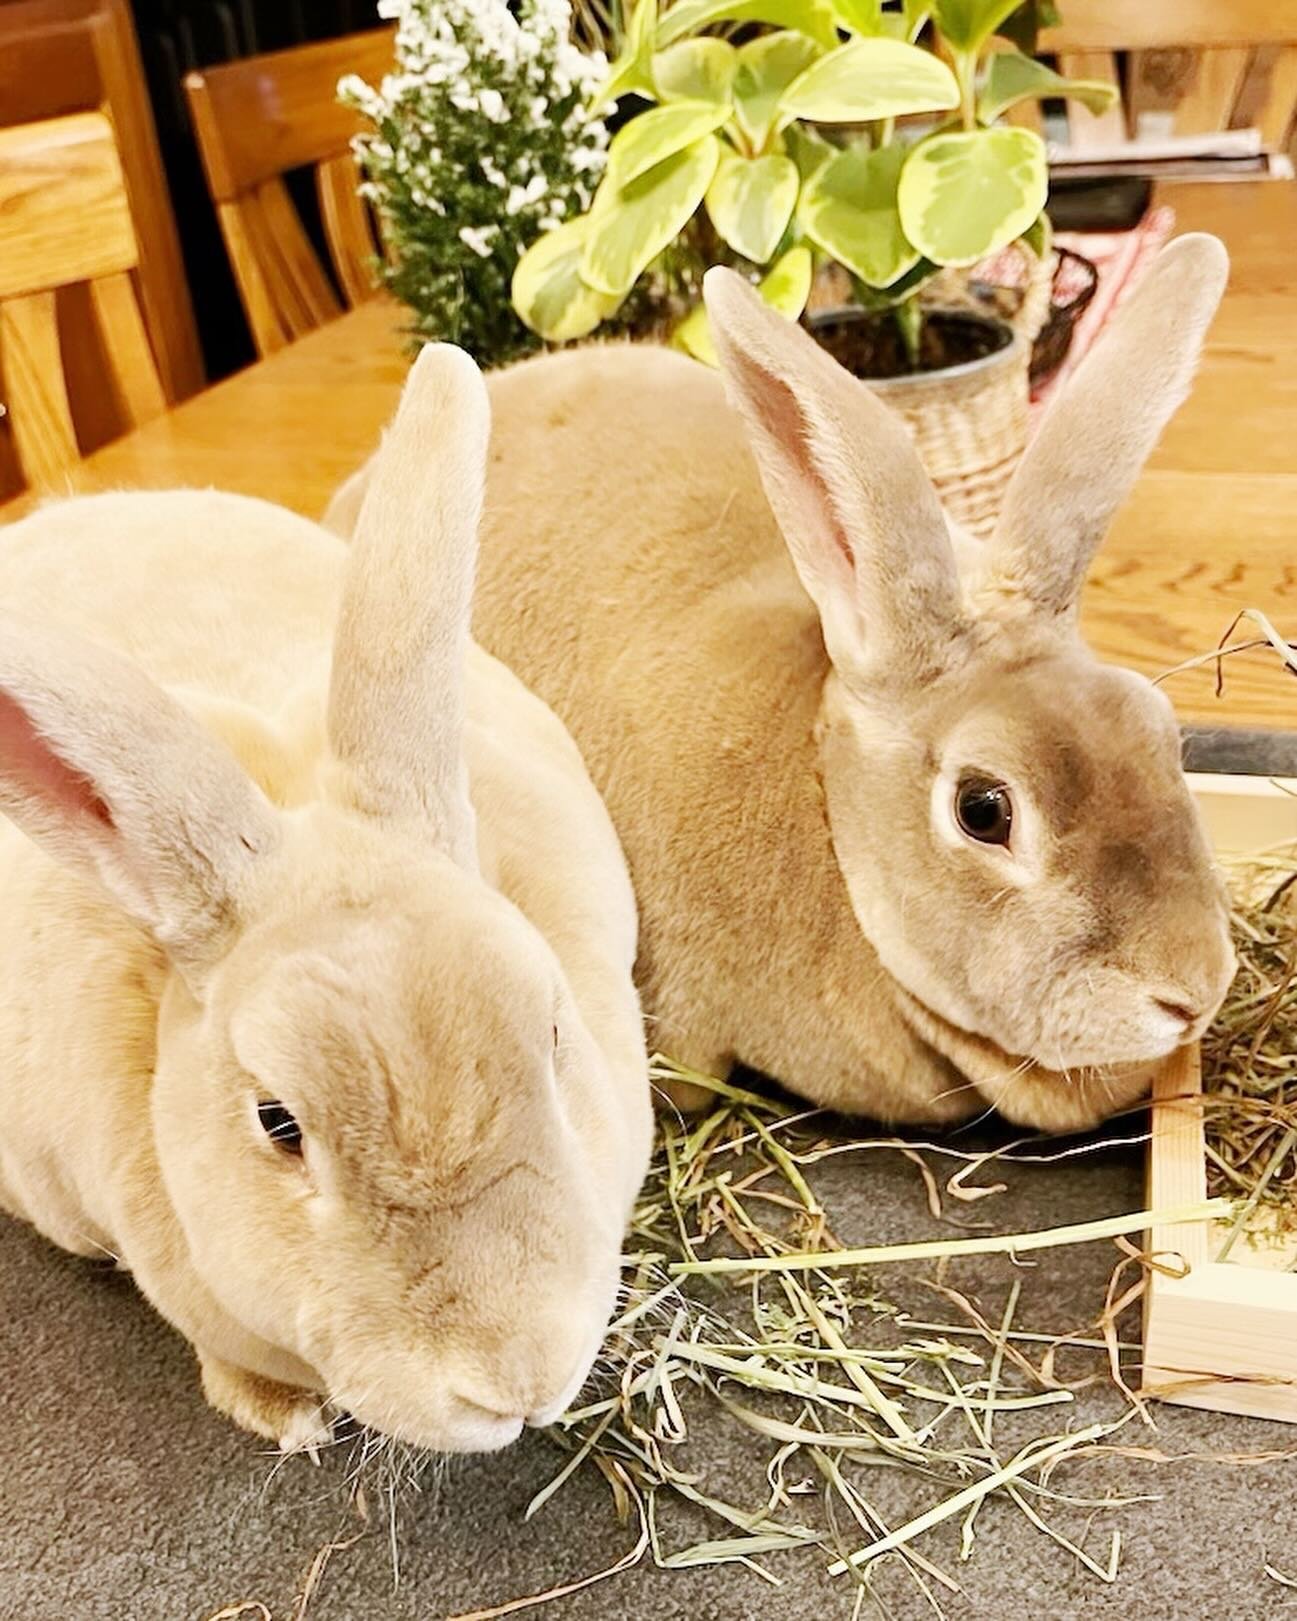 Coming THIS SATURDAY to Dog River Pet Supplies:
ADOPTABLE BUNNIES!!!
✨🐰🐰🐰✨
We are so excited for a new partnership with a rabbit rescue in Portland, paws crossed we can help some of these buns find their forever homes. 🩵
Come by the shop between 